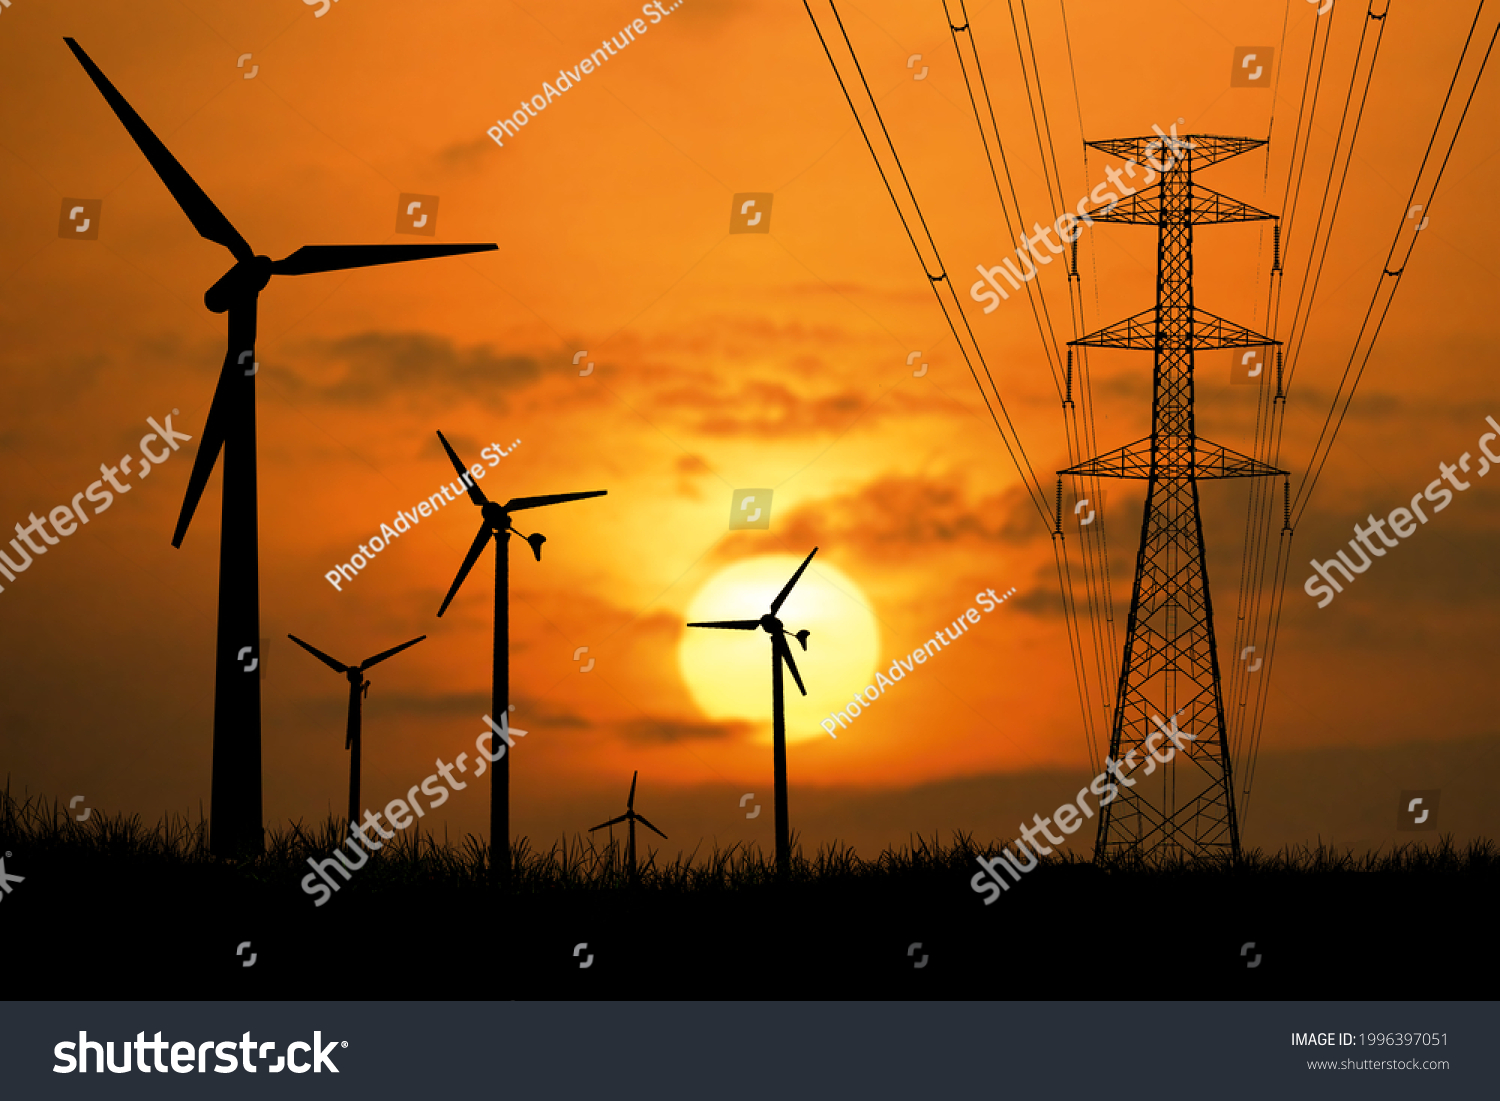 Silhouettes of wind turbines and high-voltage poles in a field at sunset. #1996397051